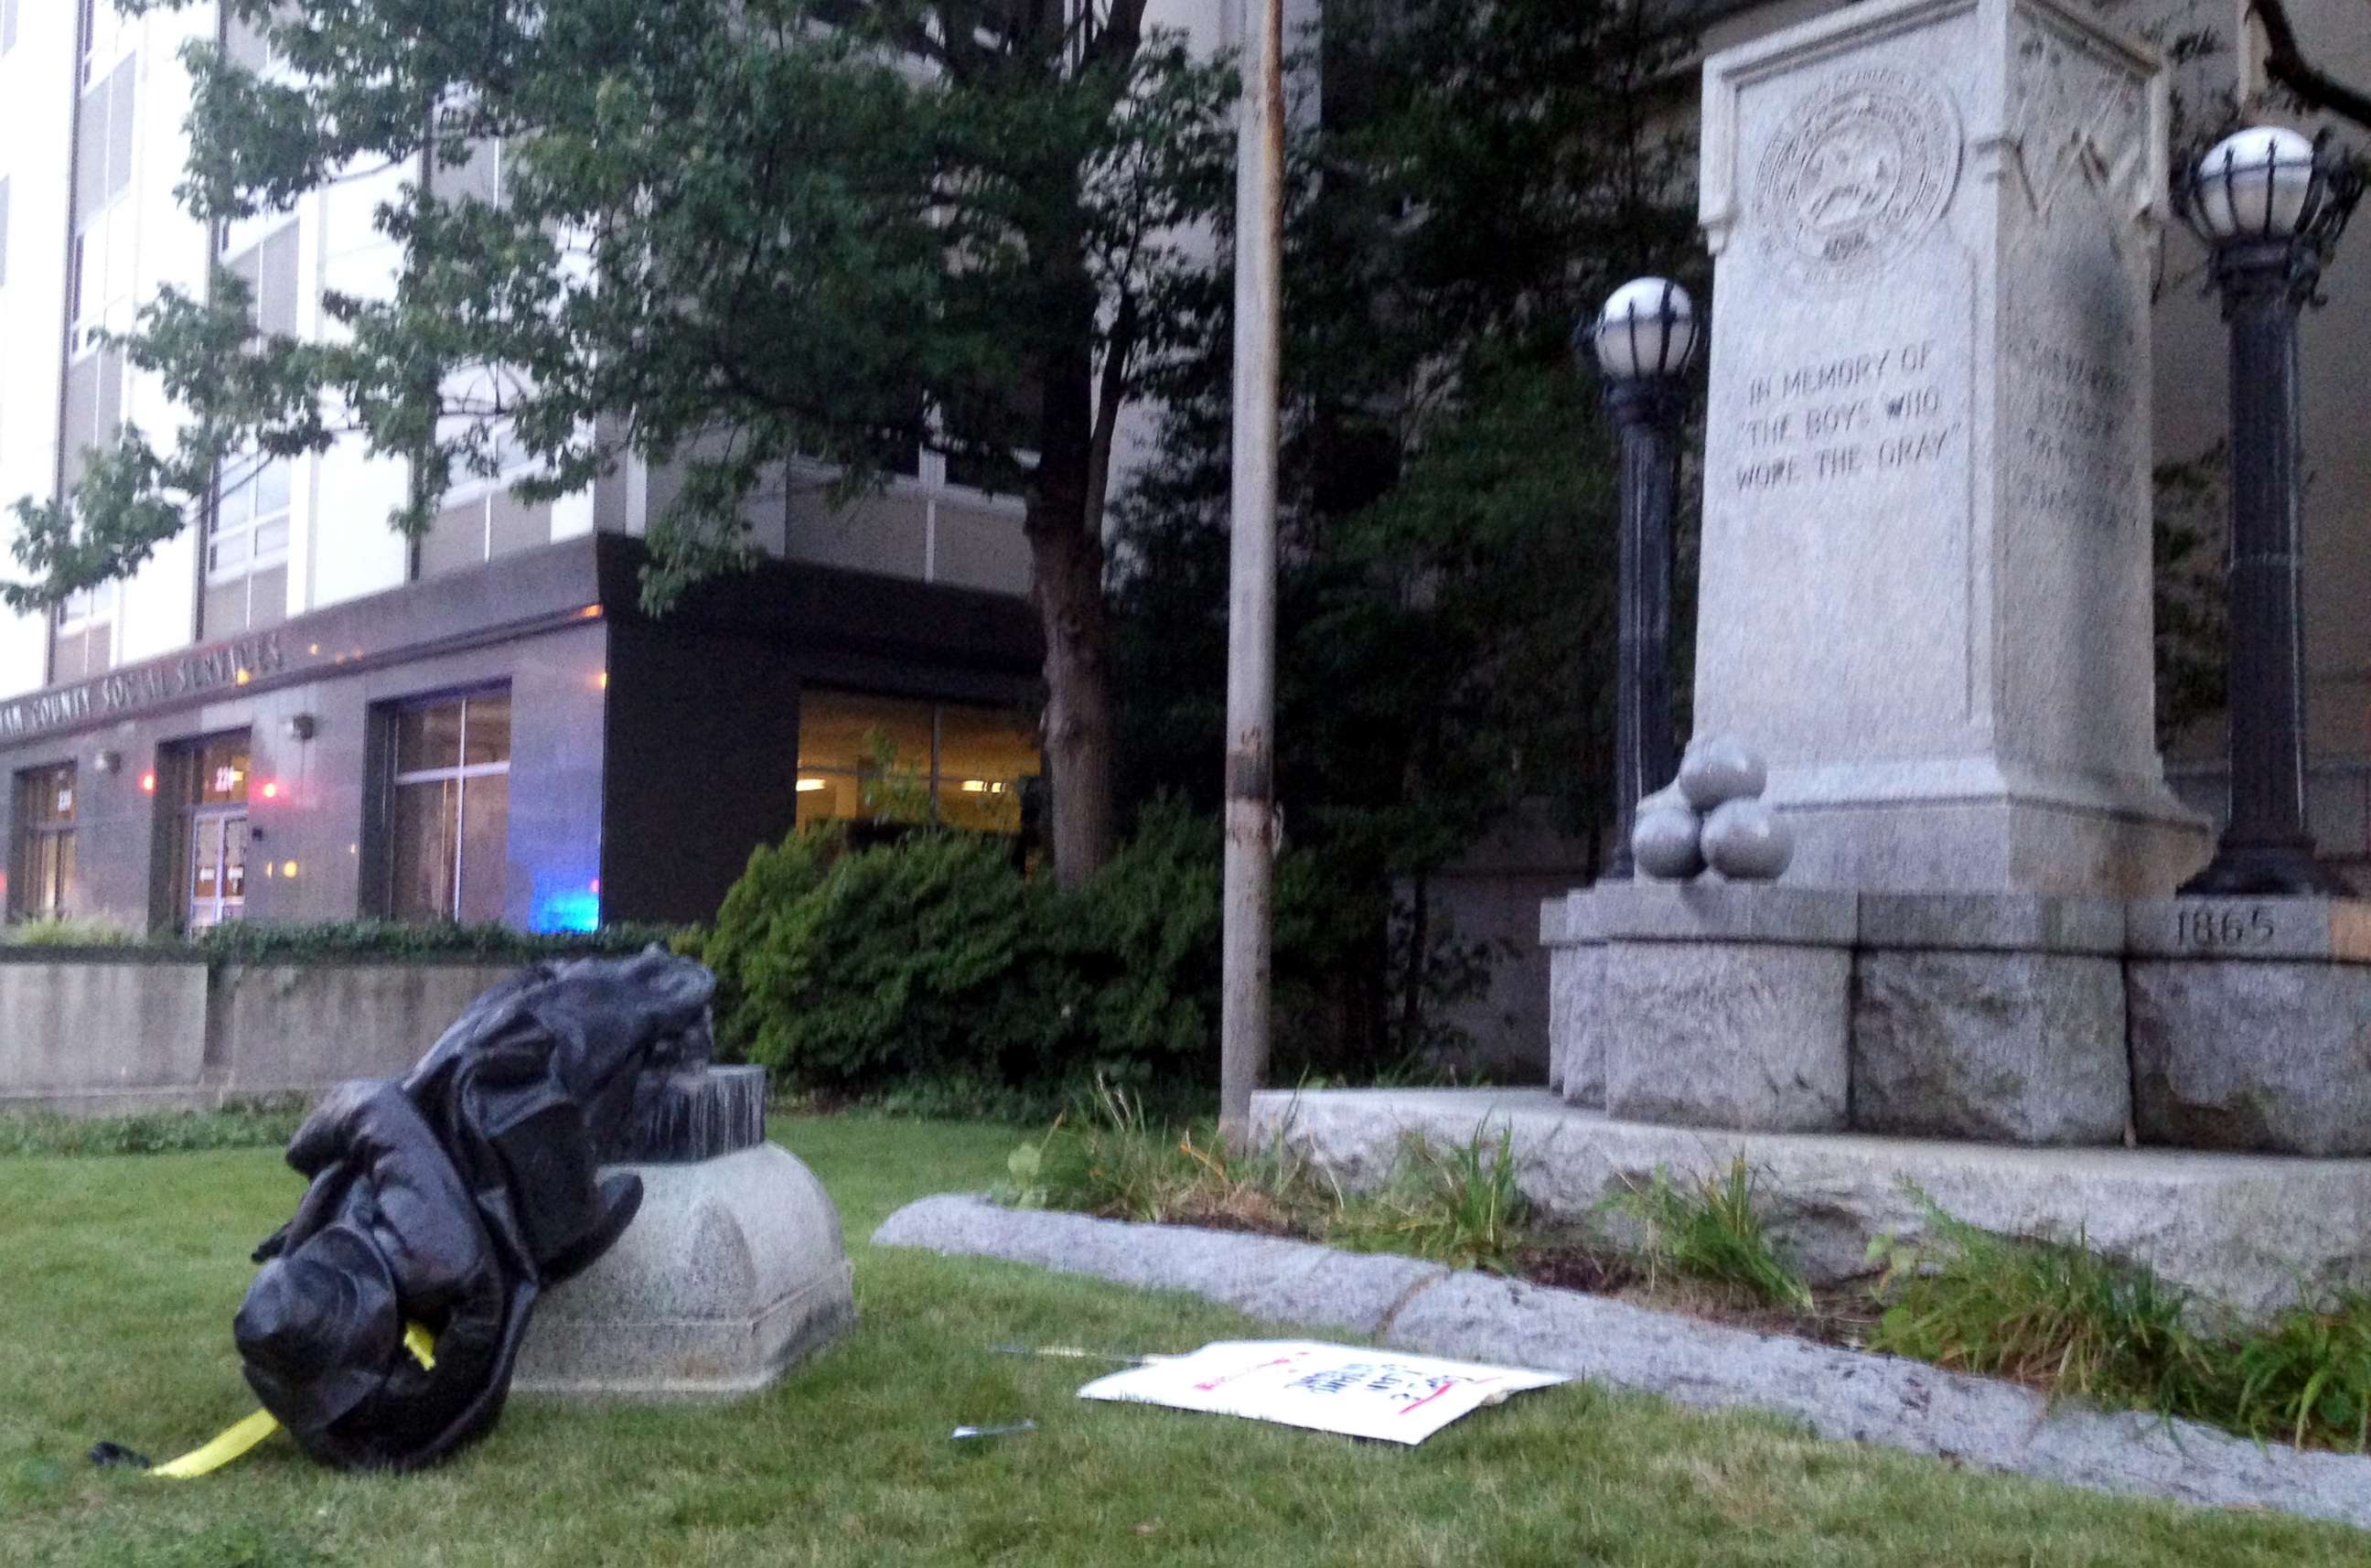 PHOTO: A toppled Confederate statue lies on the ground on Aug. 14, 2017, in Durham, N.C. Activists on Monday evening used a rope to pull down the monument outside a Durham courthouse in response to the events in Charlottesville over the weekend.